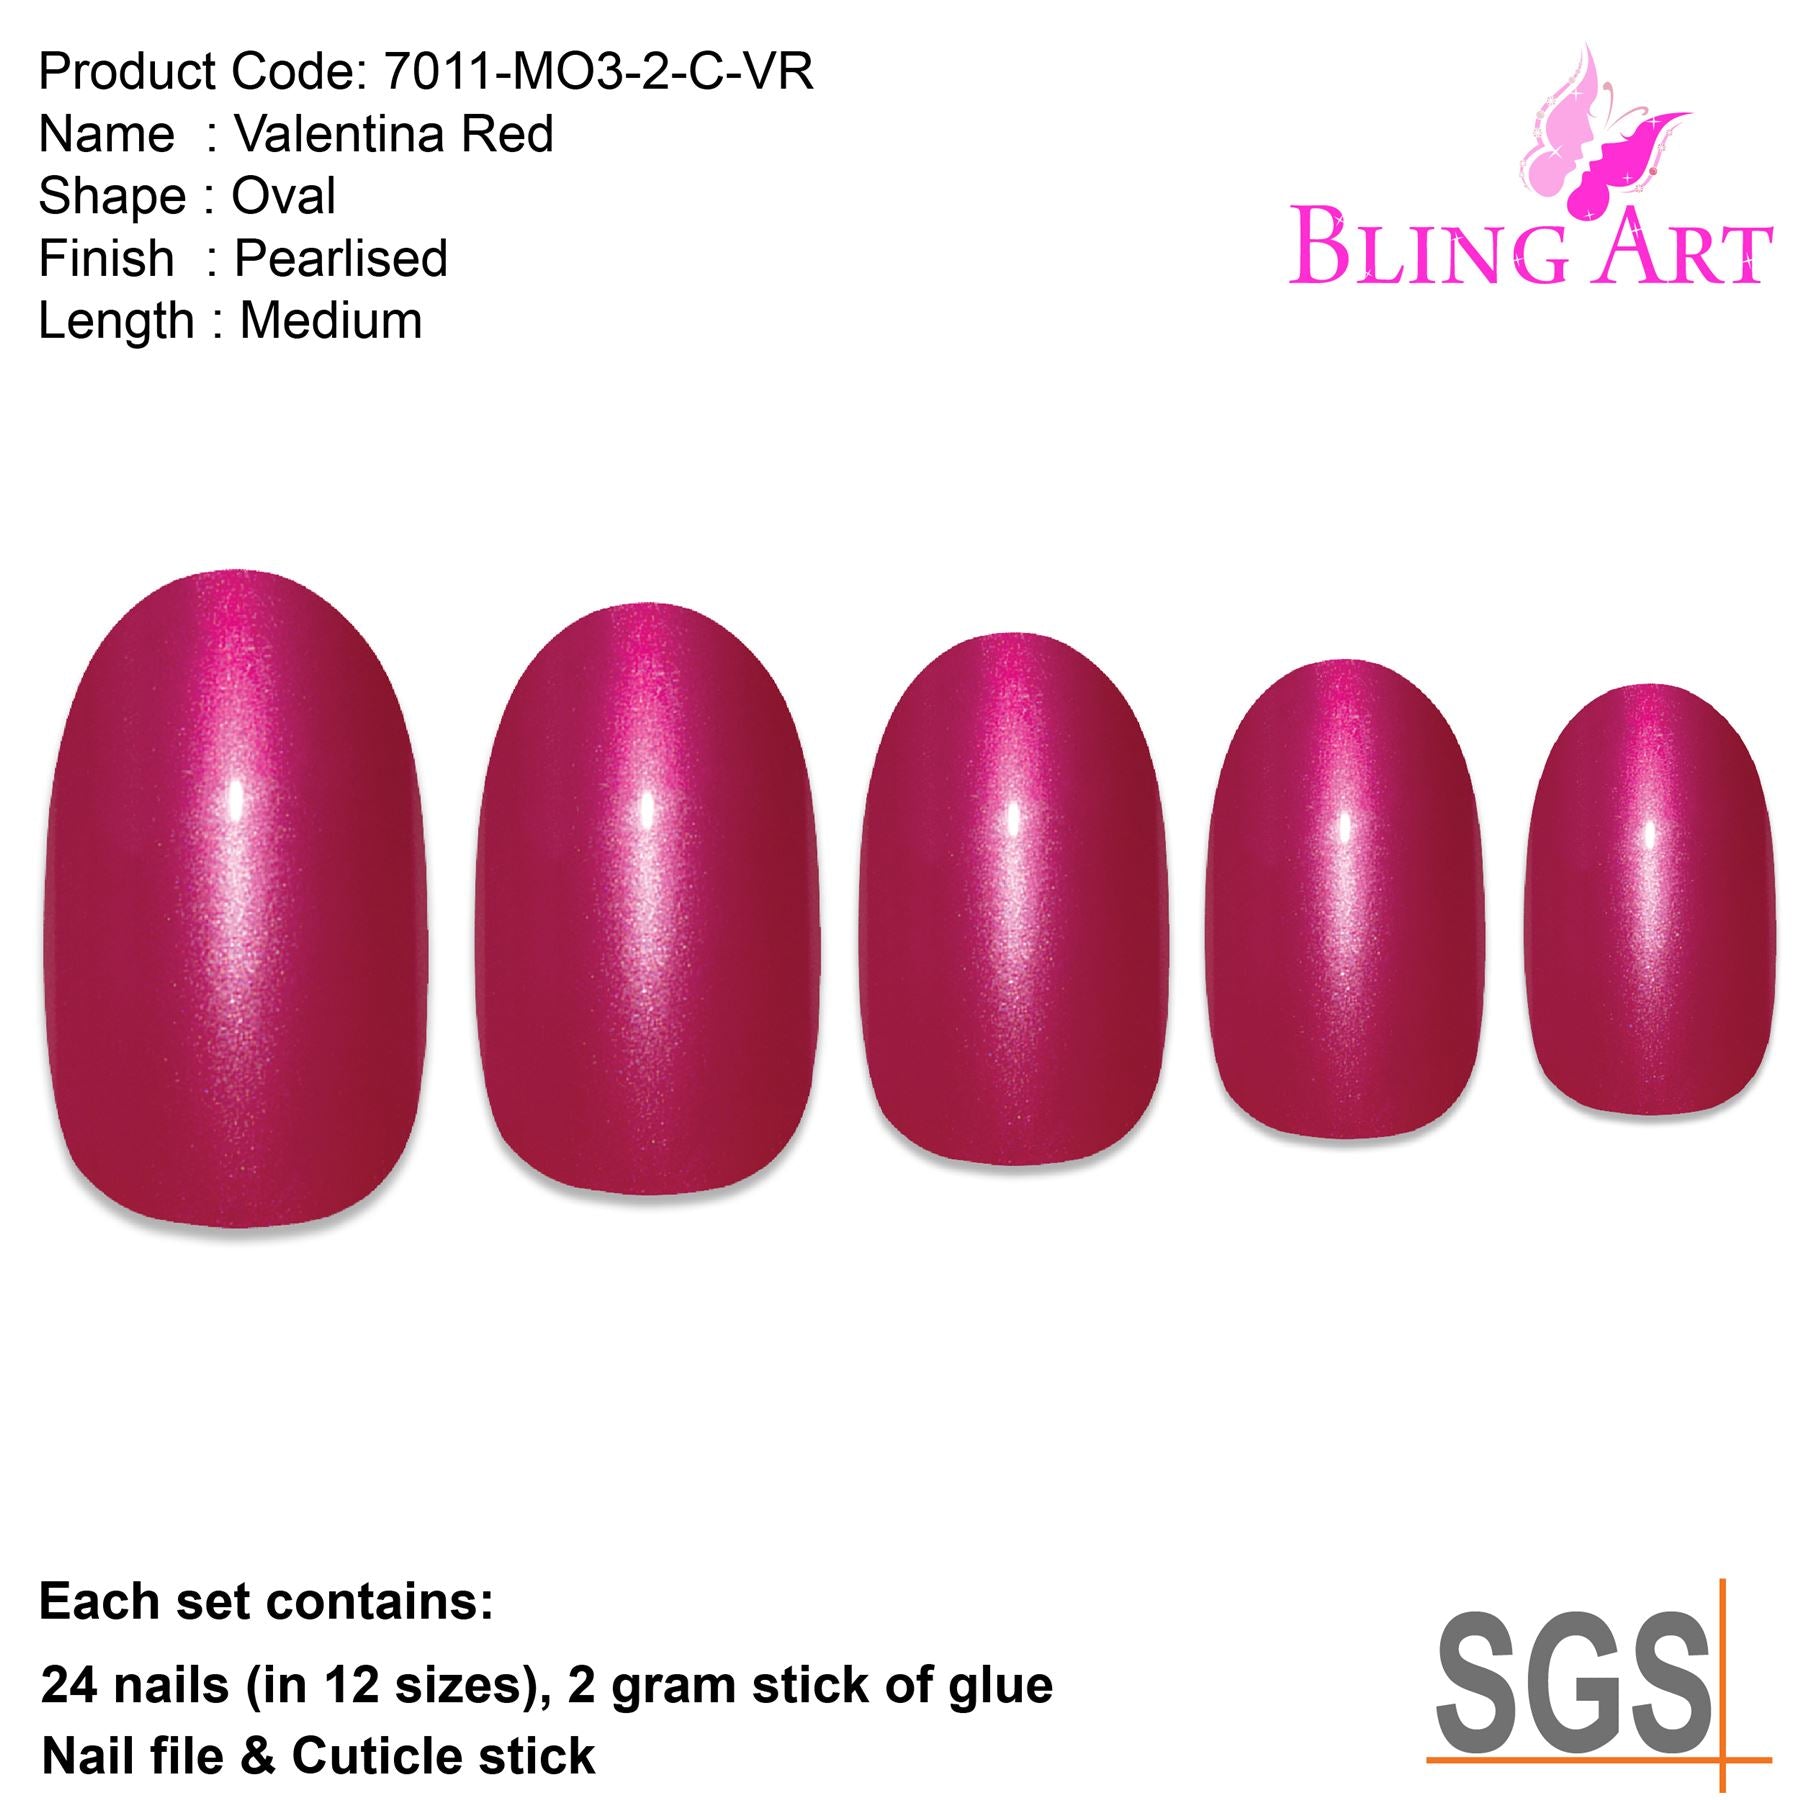 False Nails by Bling Art Red Glitter Oval Medium Fake Acrylic 24 Tips with Glue